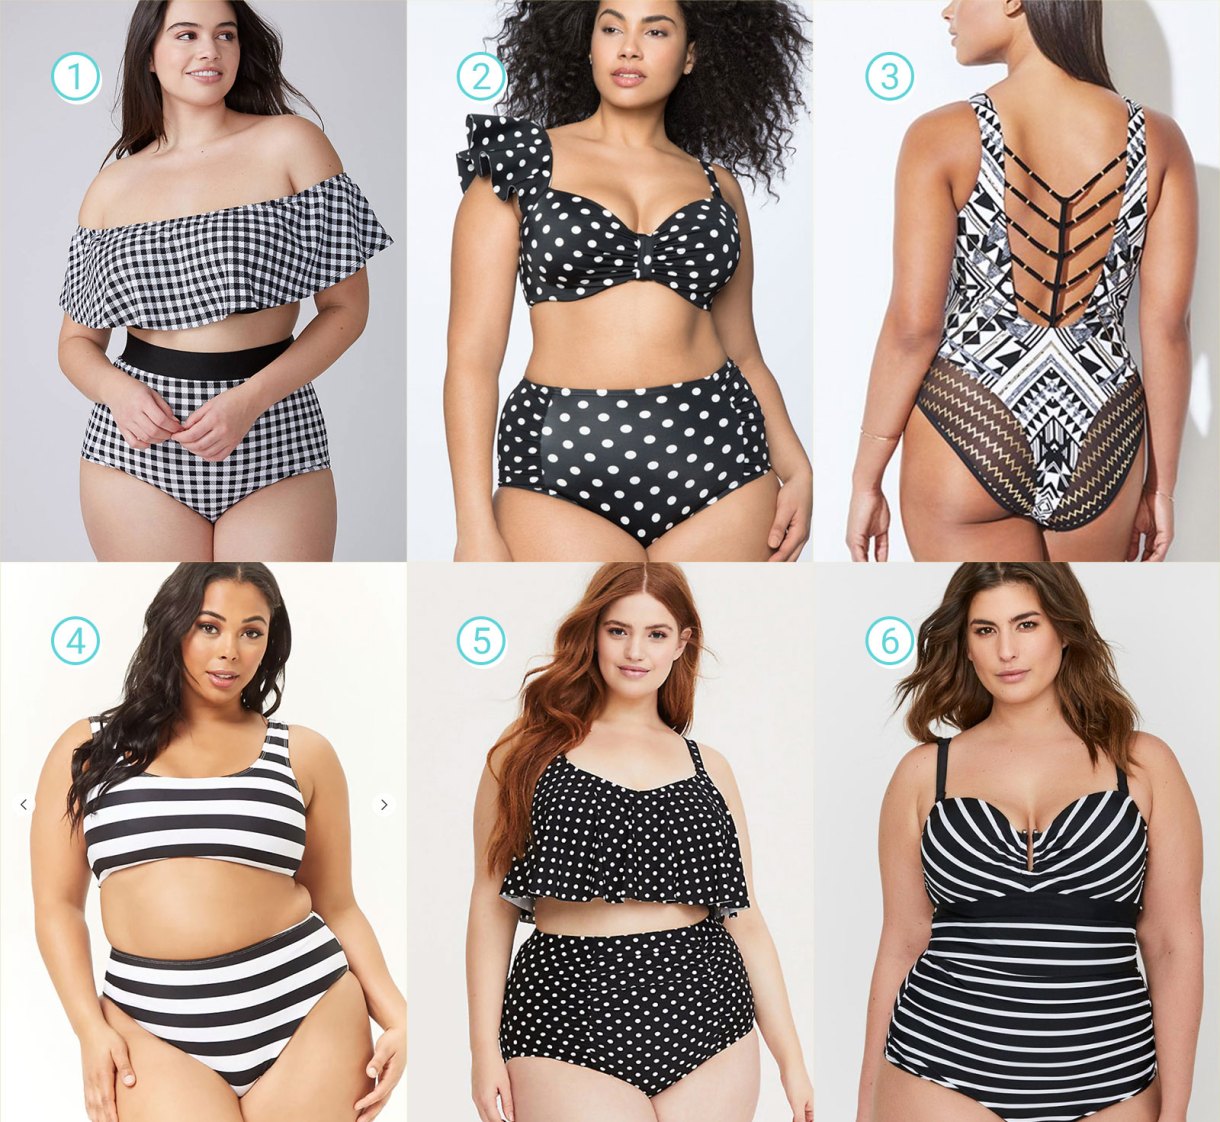 Black and White Plus Size Swimsuits Guide